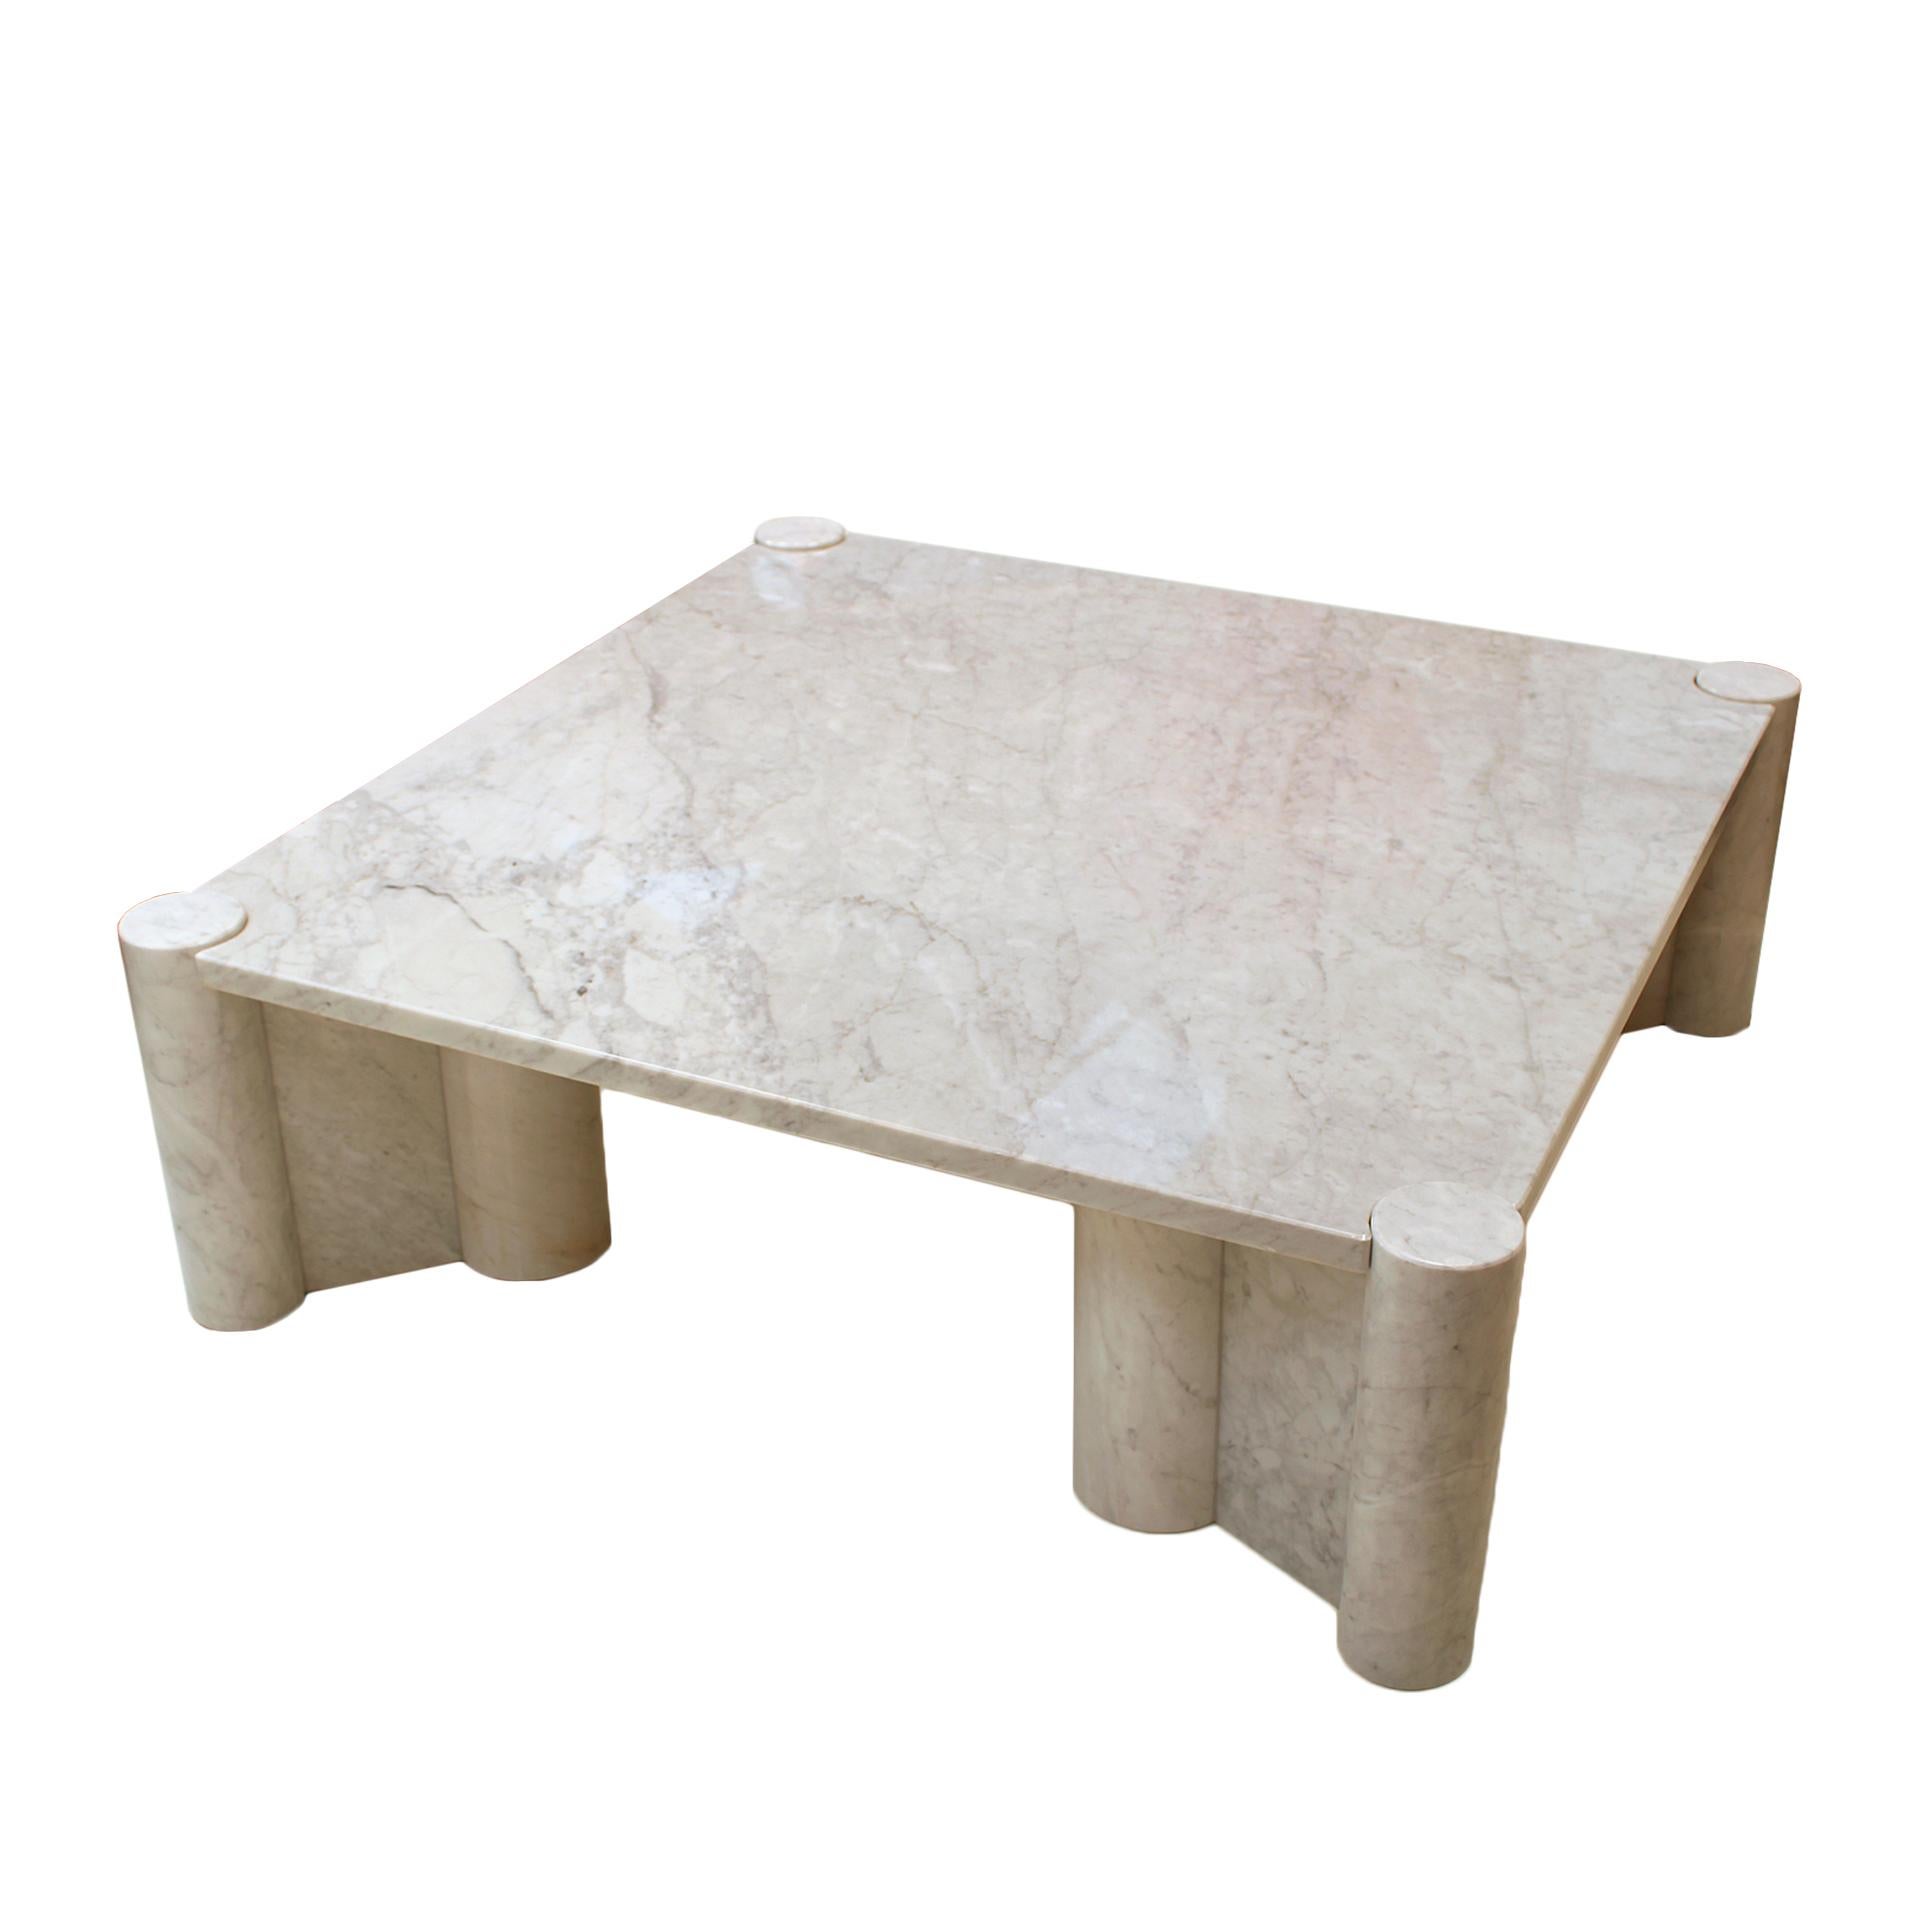 An early Mid-Century Modern Jumbo coffee table designed by Gae Aulenti (Italy, 1927-1972) for Knoll. Made in Carrara marble. Square tabletop with four cylindrical cluster legs. Very good condition.
This coffee table is definitely one of the